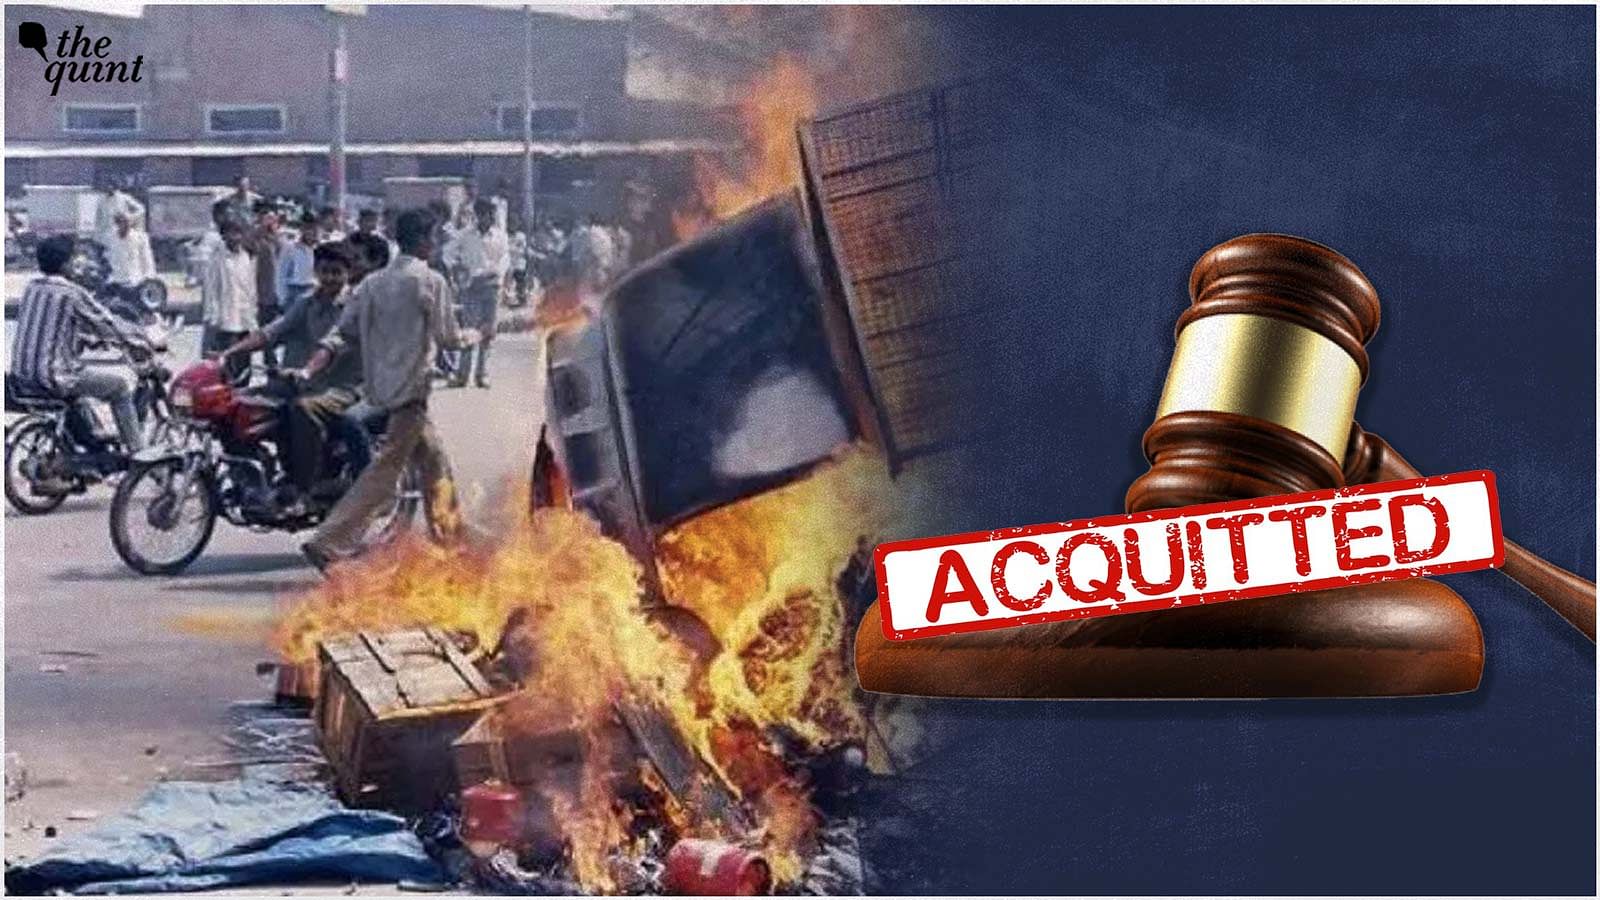 <div class="paragraphs"><p>A Muslim man charged in a 2020 northeast Delhi riots case was acquitted by a district court in the city.</p></div>